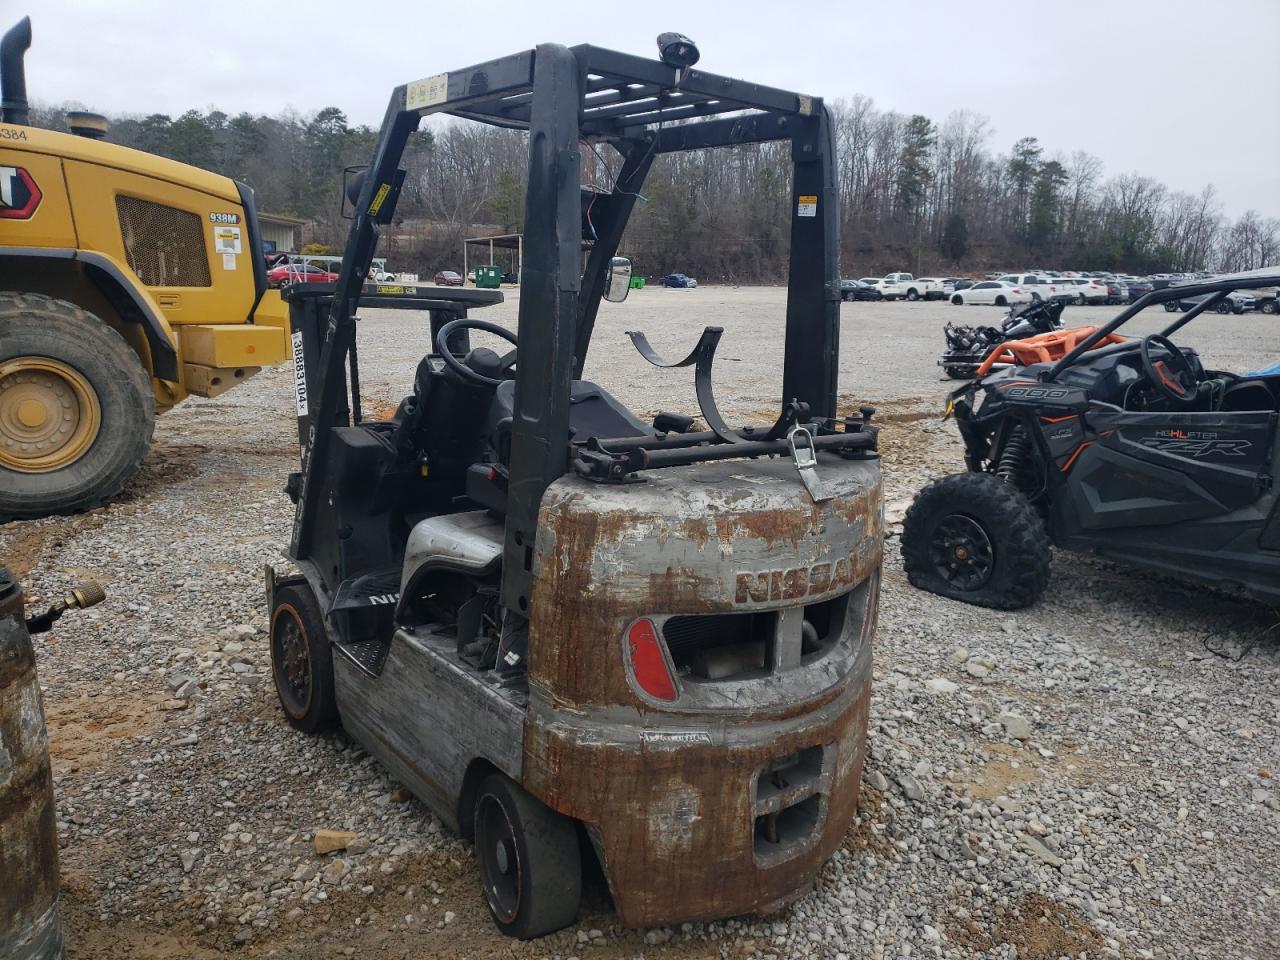 CP1F29W**** Salvage and Repairable 2012 Nissan Forklift in AL - Hueytown